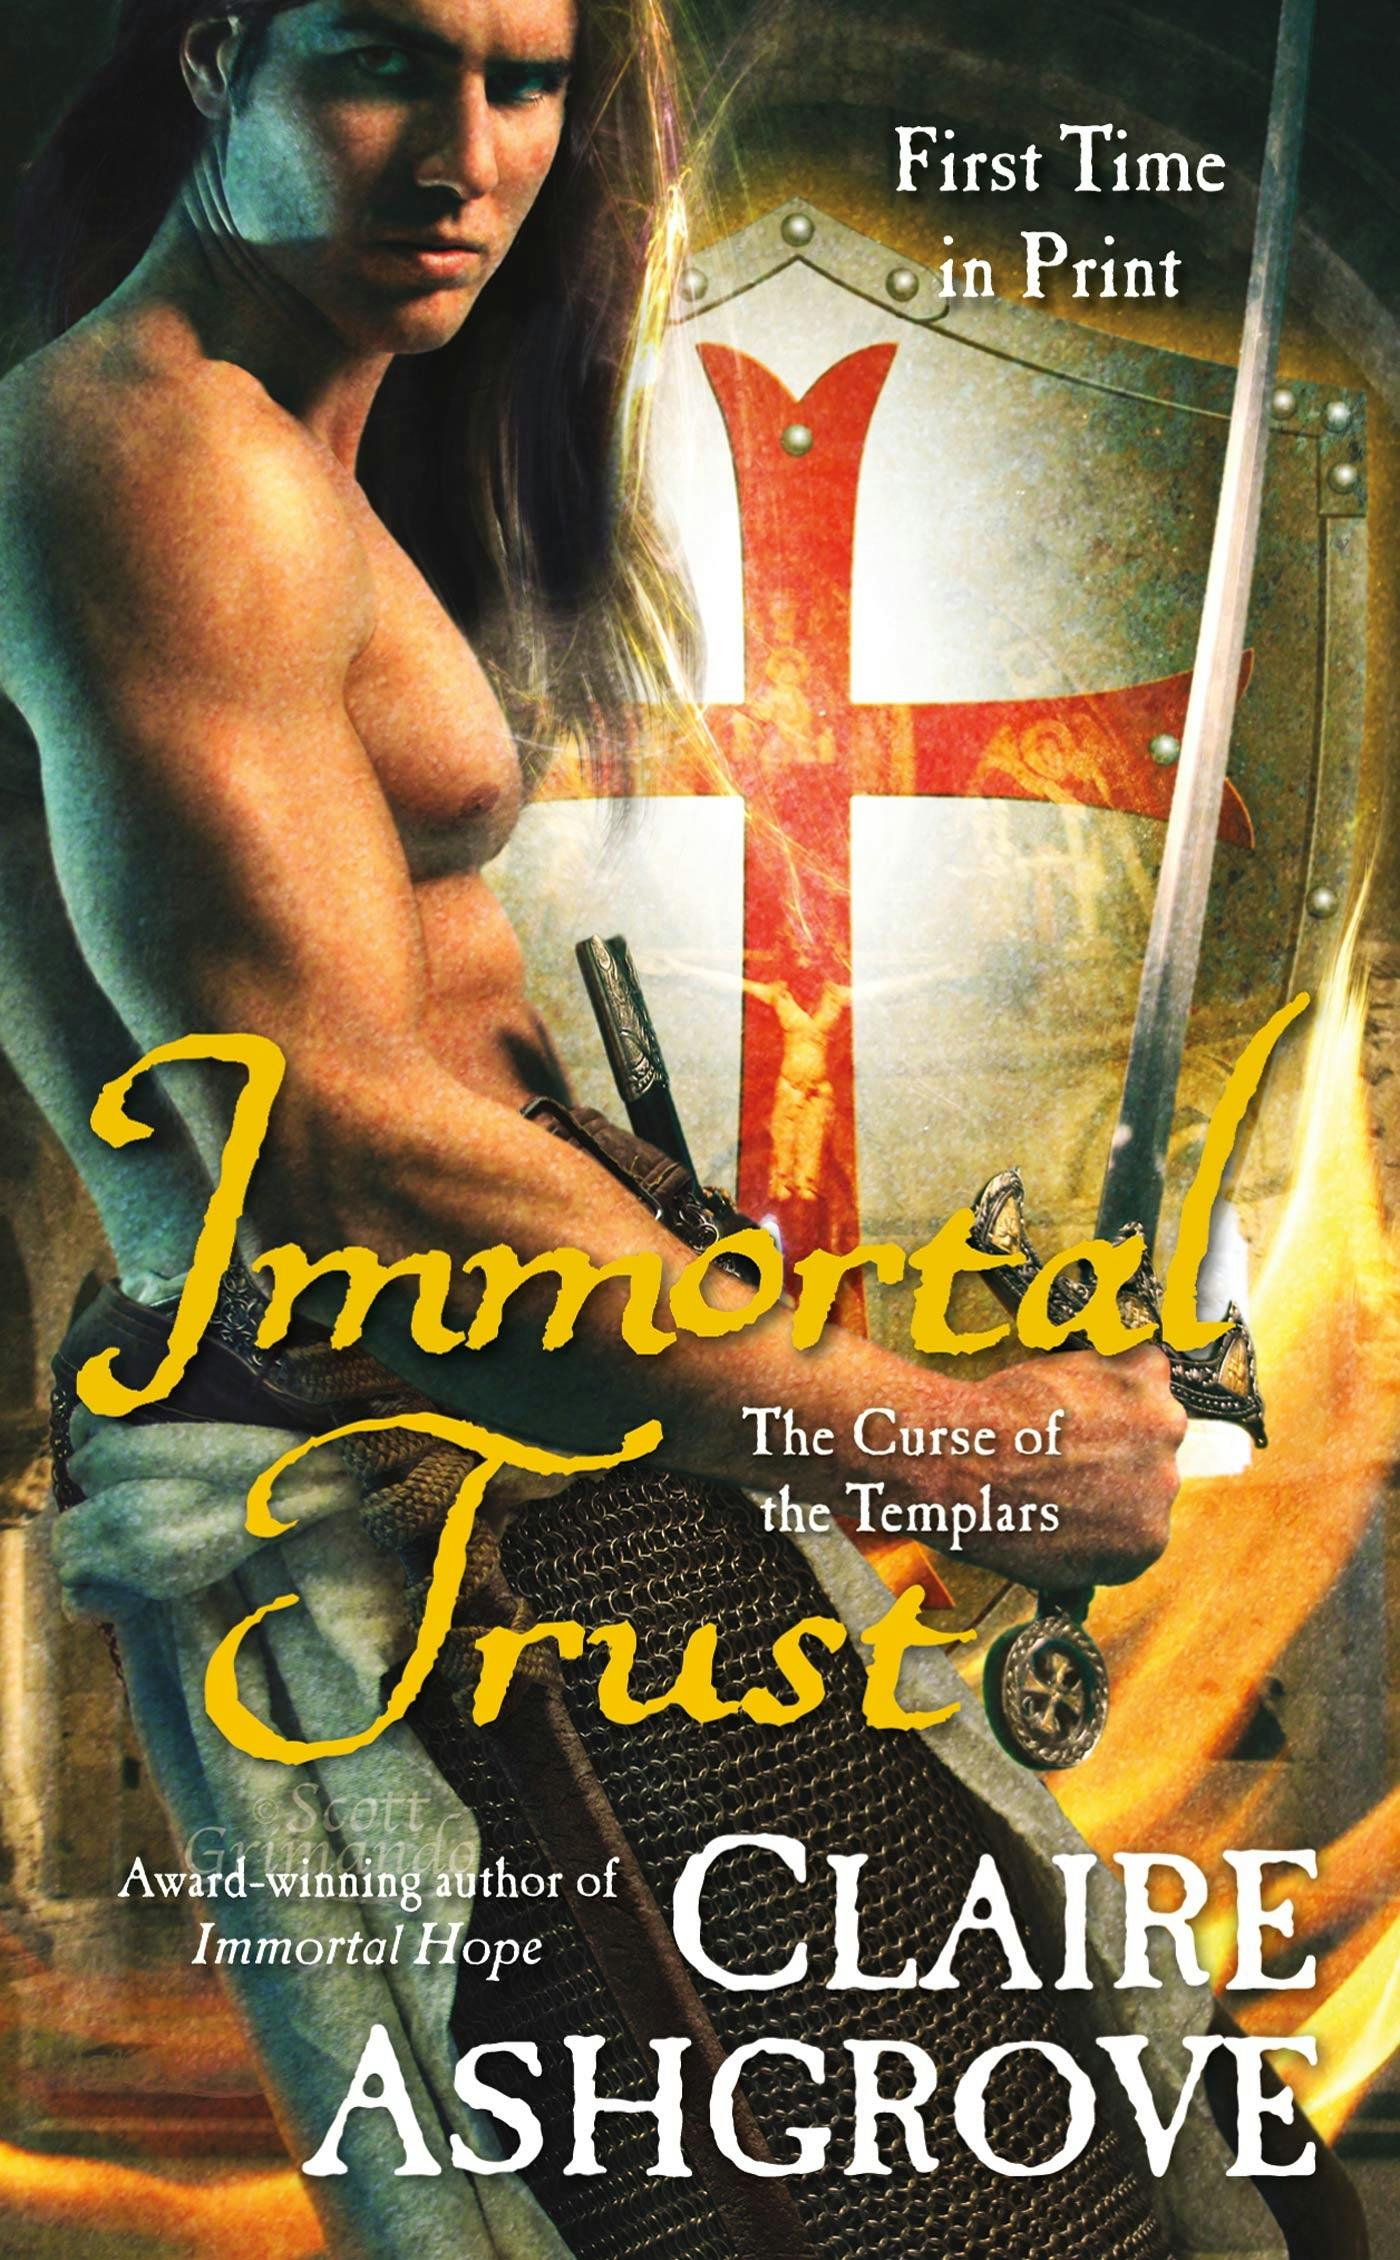 Cover for the book titled as: Immortal Trust